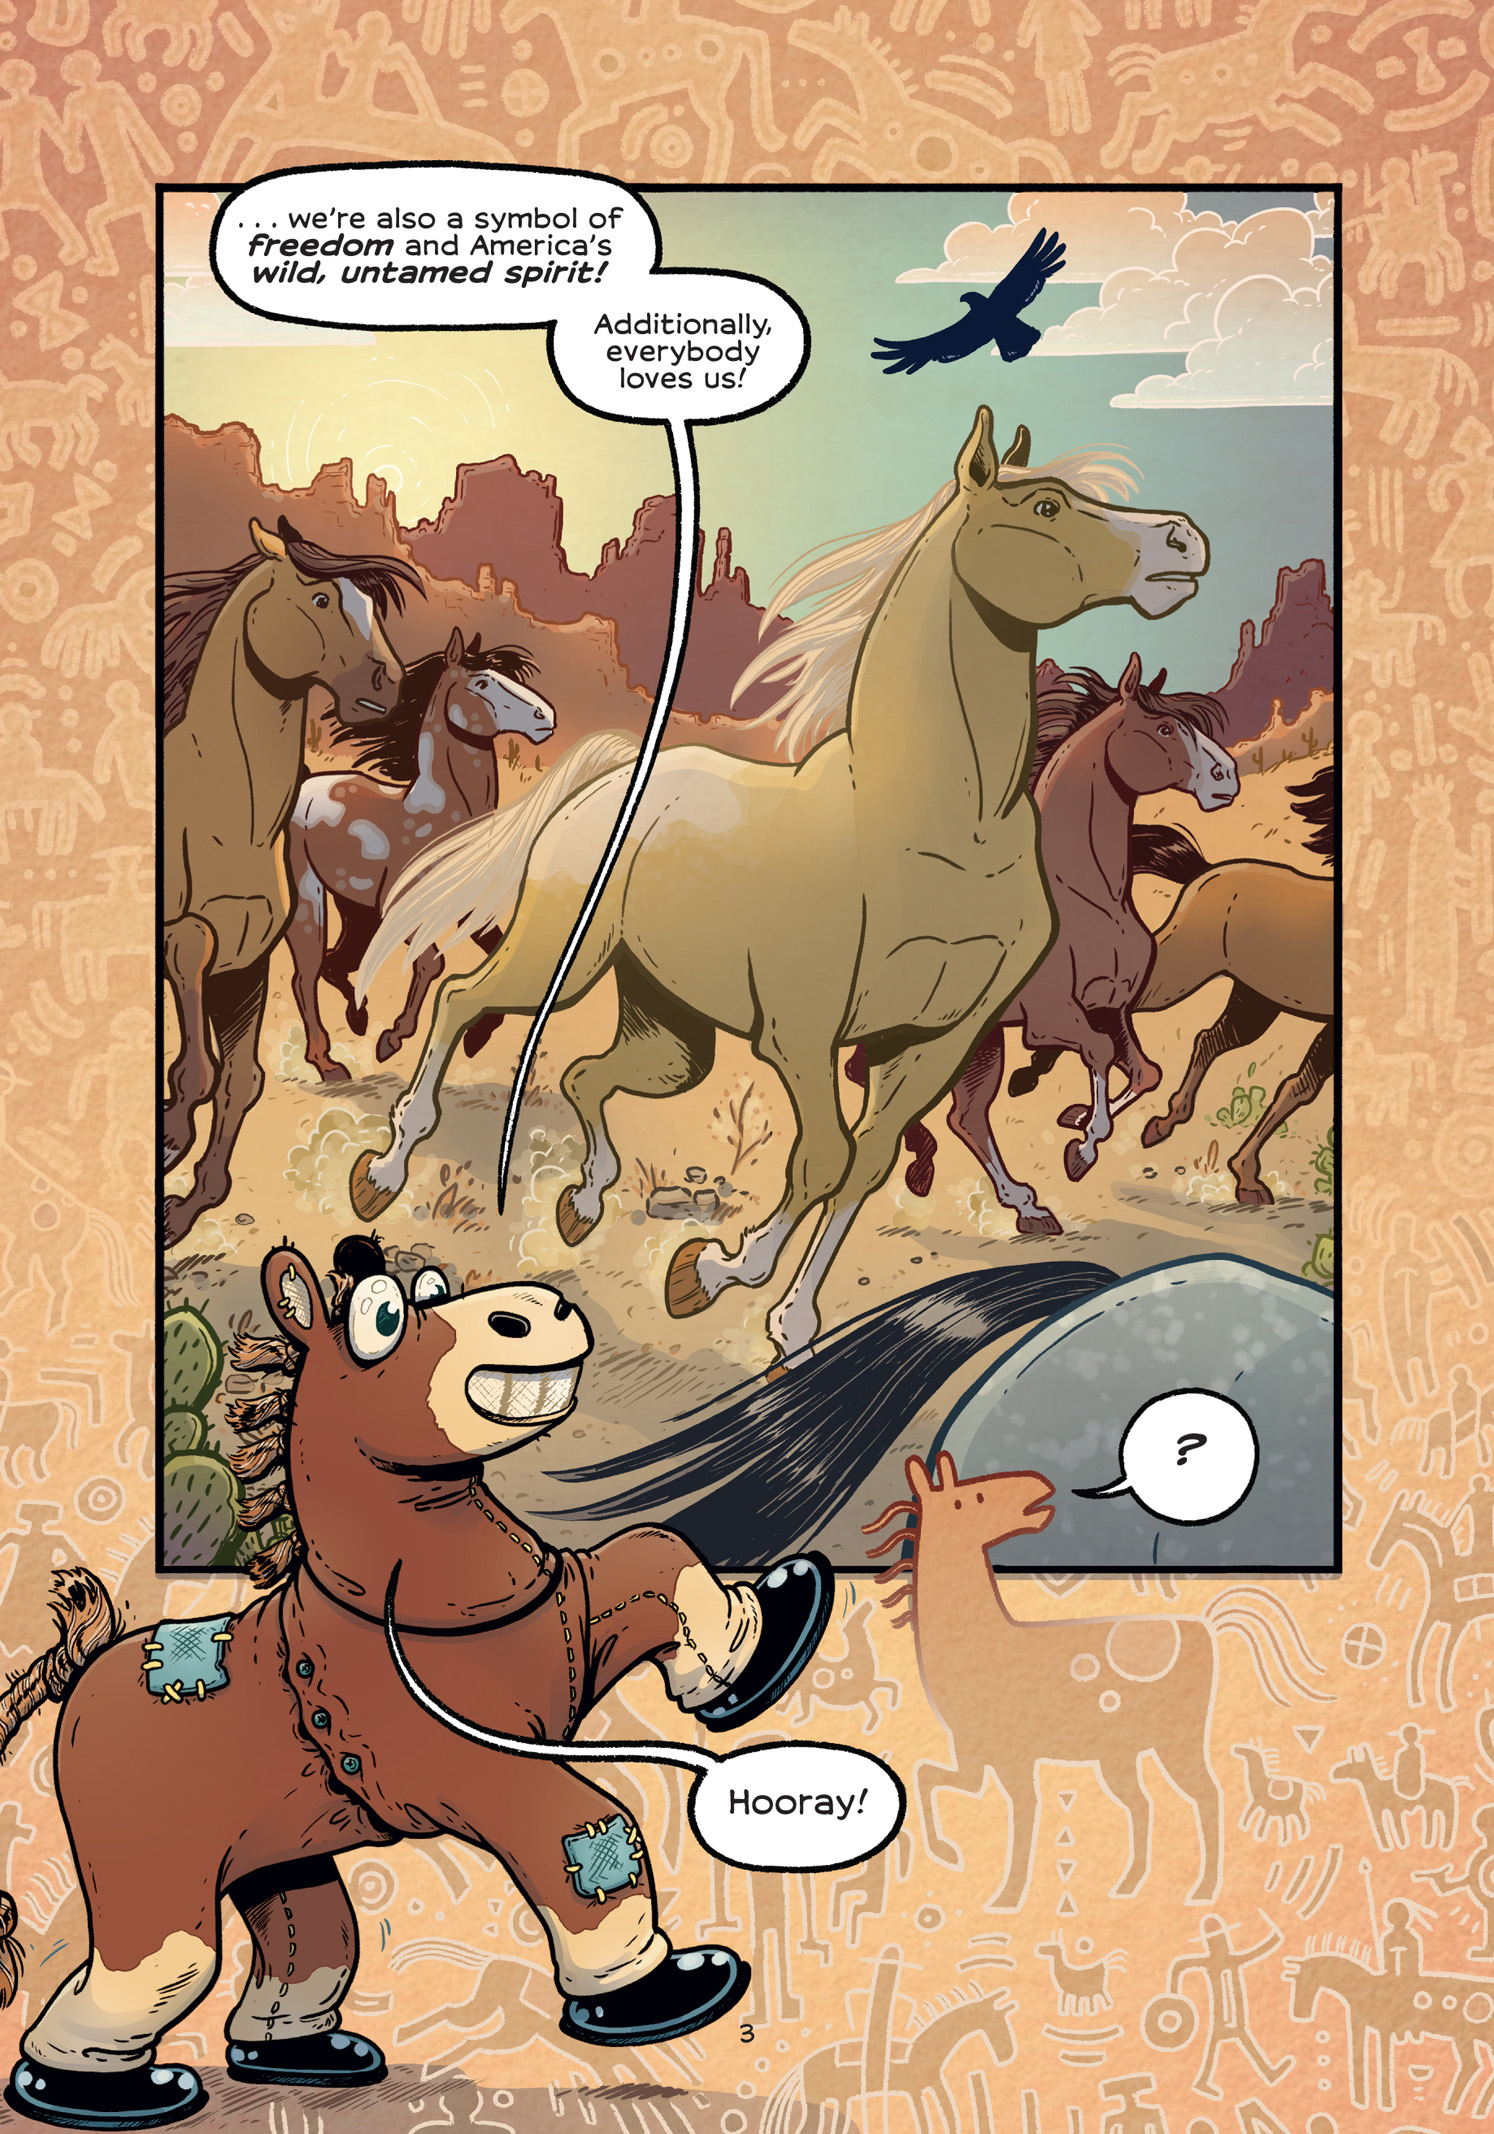 Read online History Comics comic -  Issue # The Wild Mustang - Horses of the American West - 11